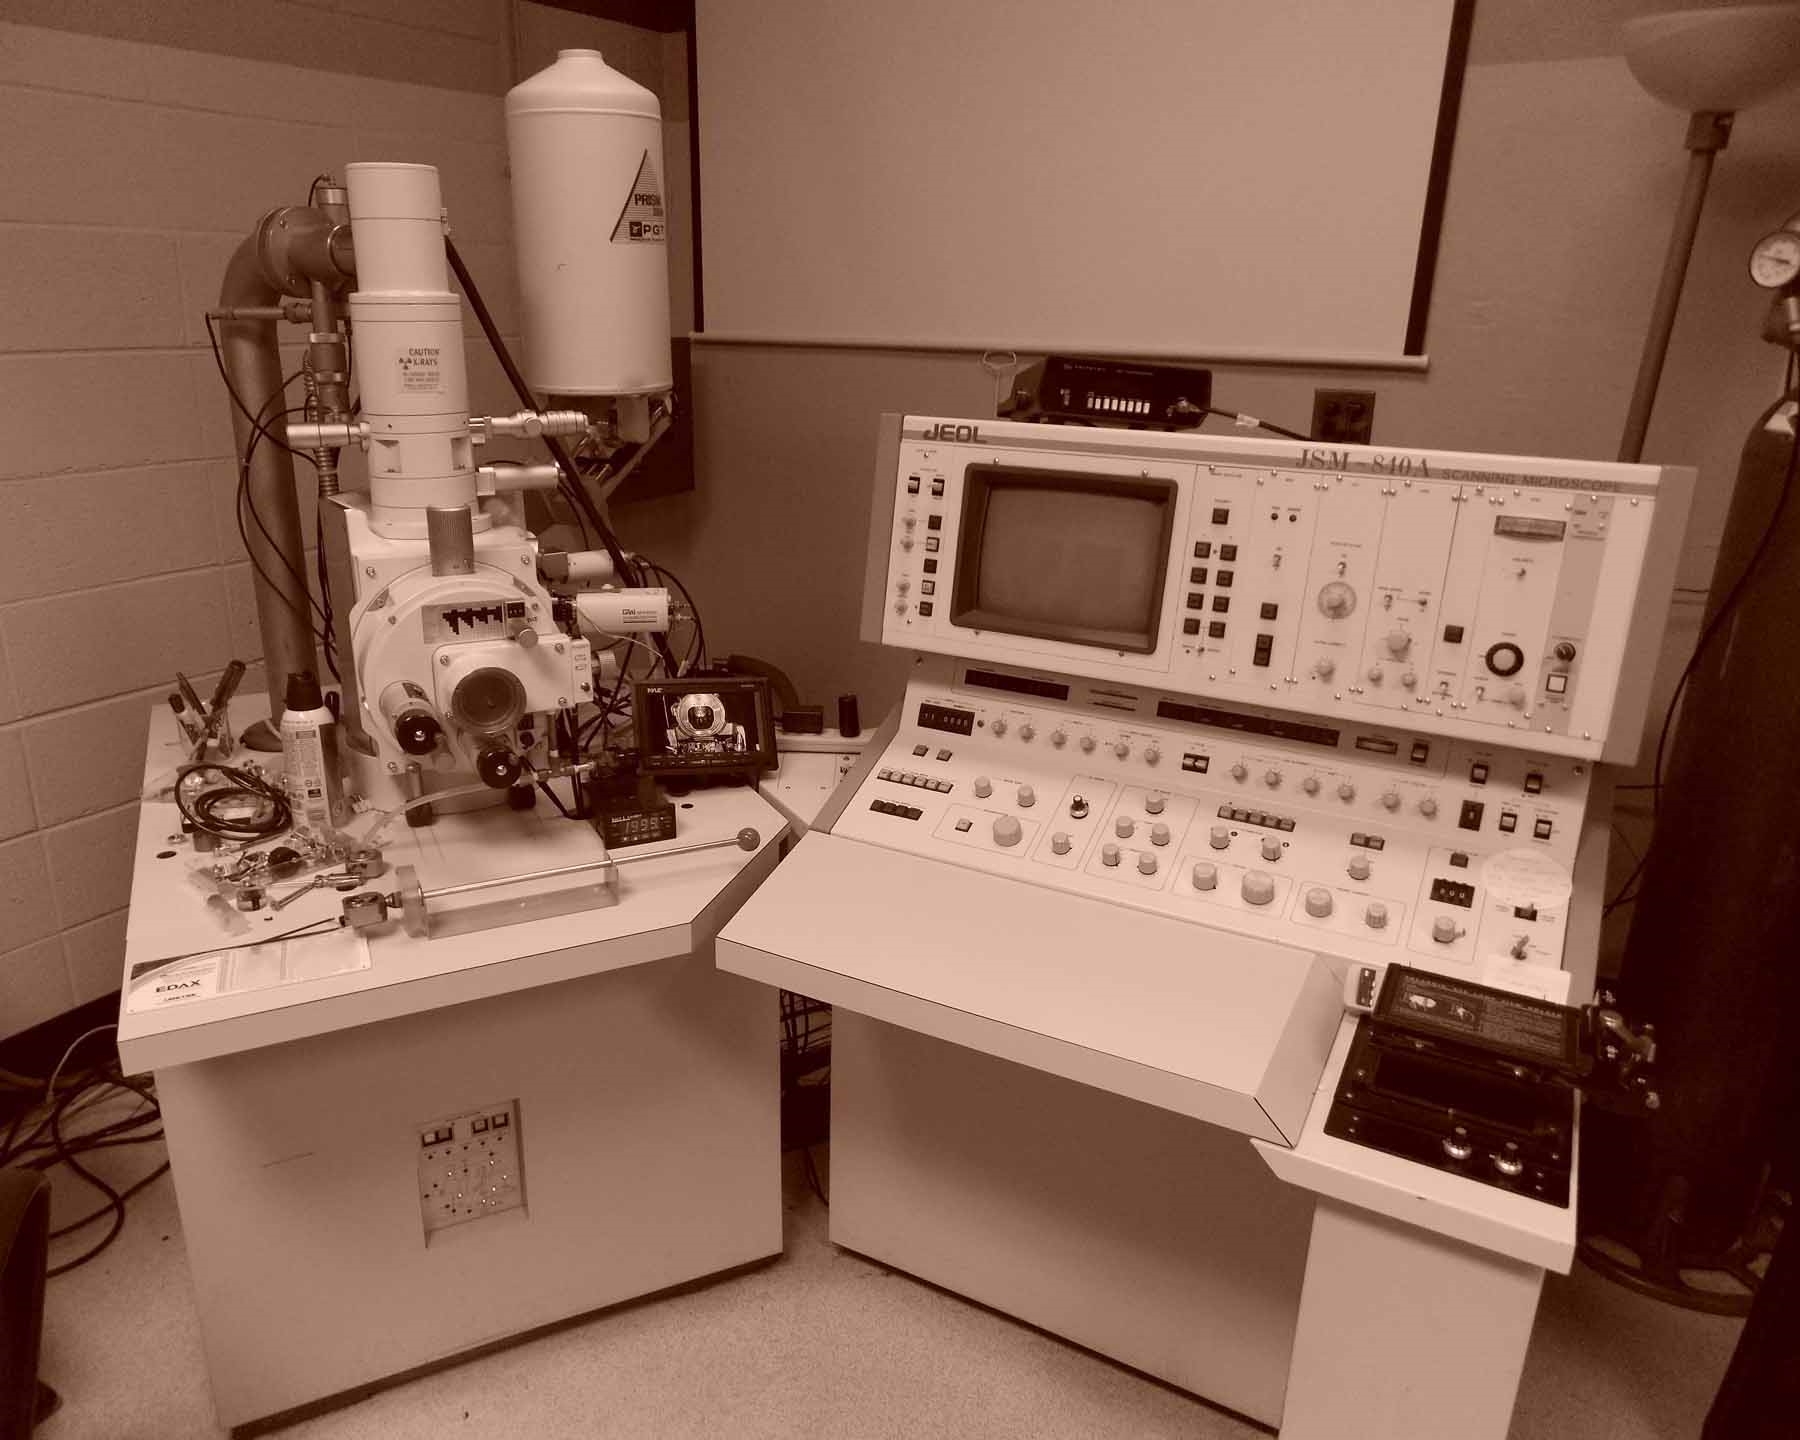 JEOL JSM 840A SEM used for sale price #9211127 > buy from CAE